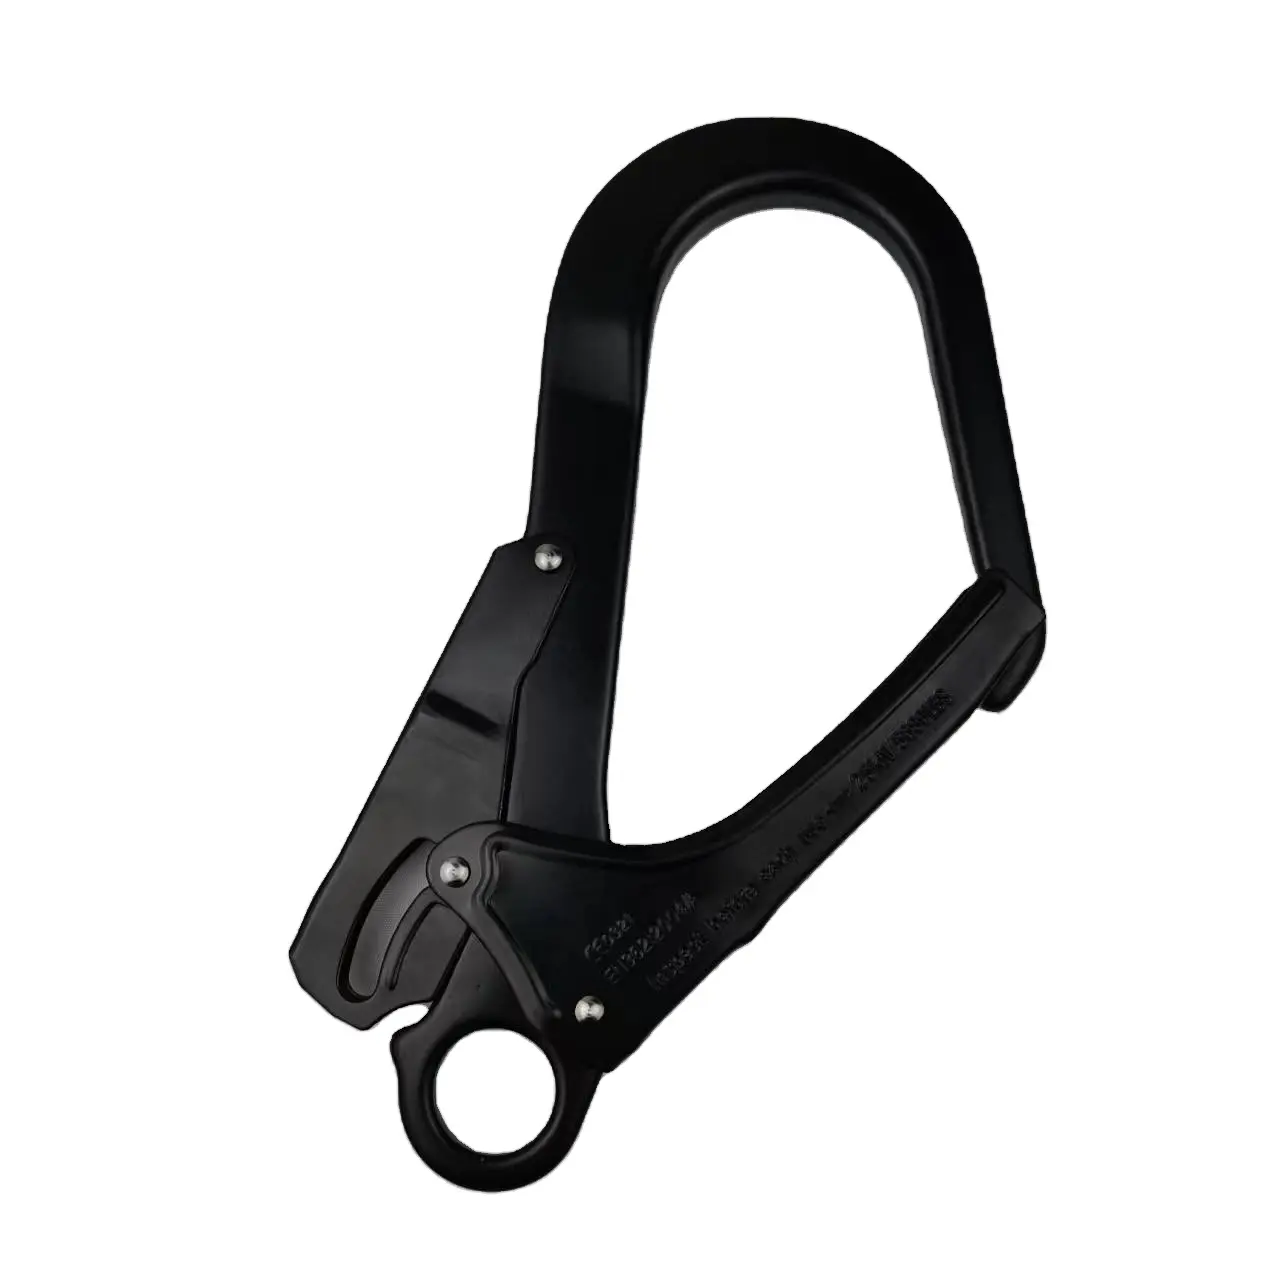 Fall arrest lanyard Forged Snap Hook 25 kN Alloy Steel carabiner with certificate retractable lanyard connectors accessories